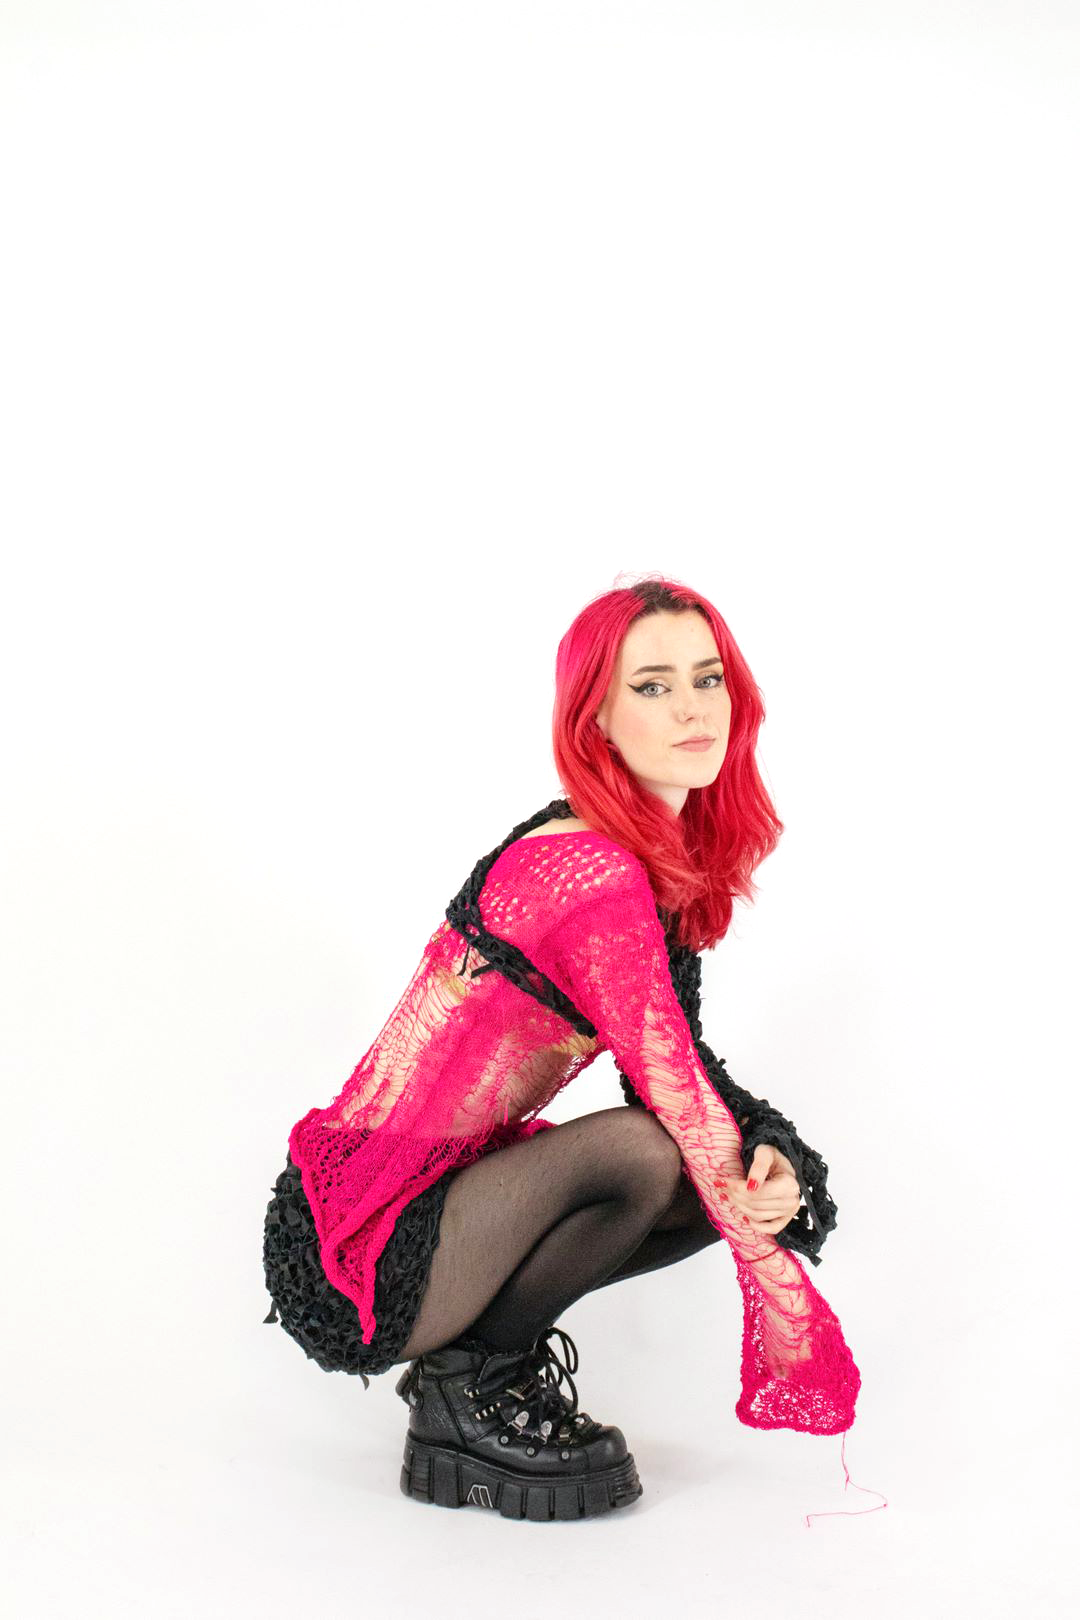 Model wearing Outfit 1 photographed by Ciara Roche. Outfit combination of knitted and crocheted pieces in hot pink and black with long sleeves and a skirt.